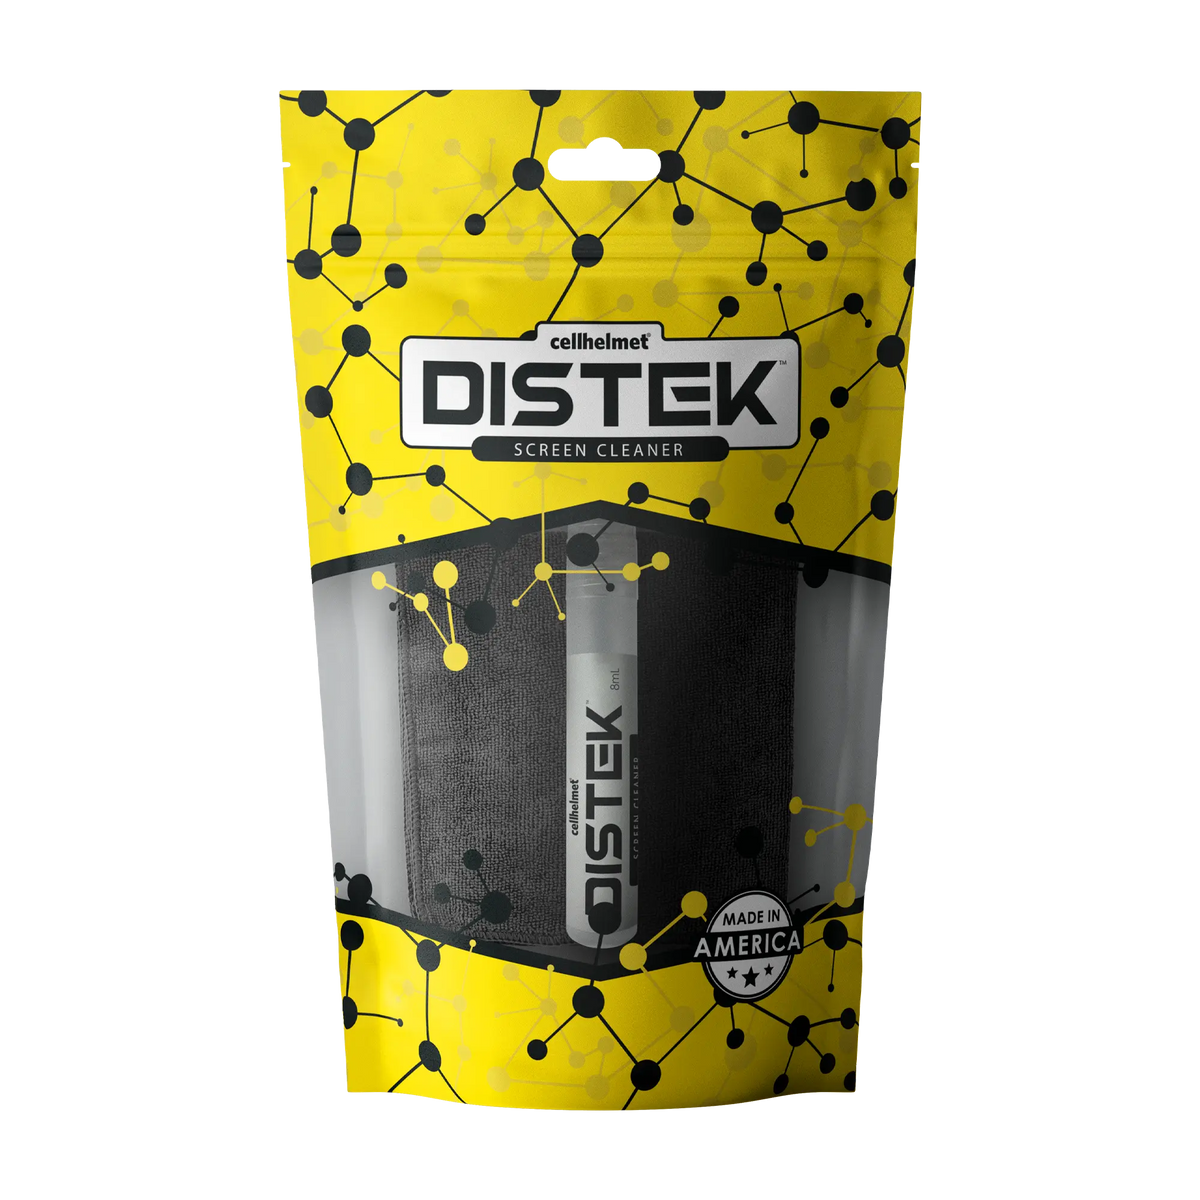 DISTEK Screen and Phone Cleaner with Cleaning Cloth - Screen Cleaner - 8mL - cellhelmet